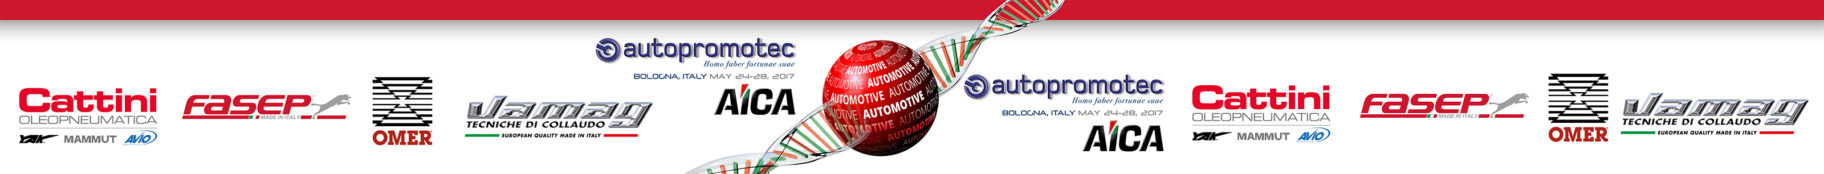 DNA-AUTOMOTIVE-2015-hanging-sign-fiera